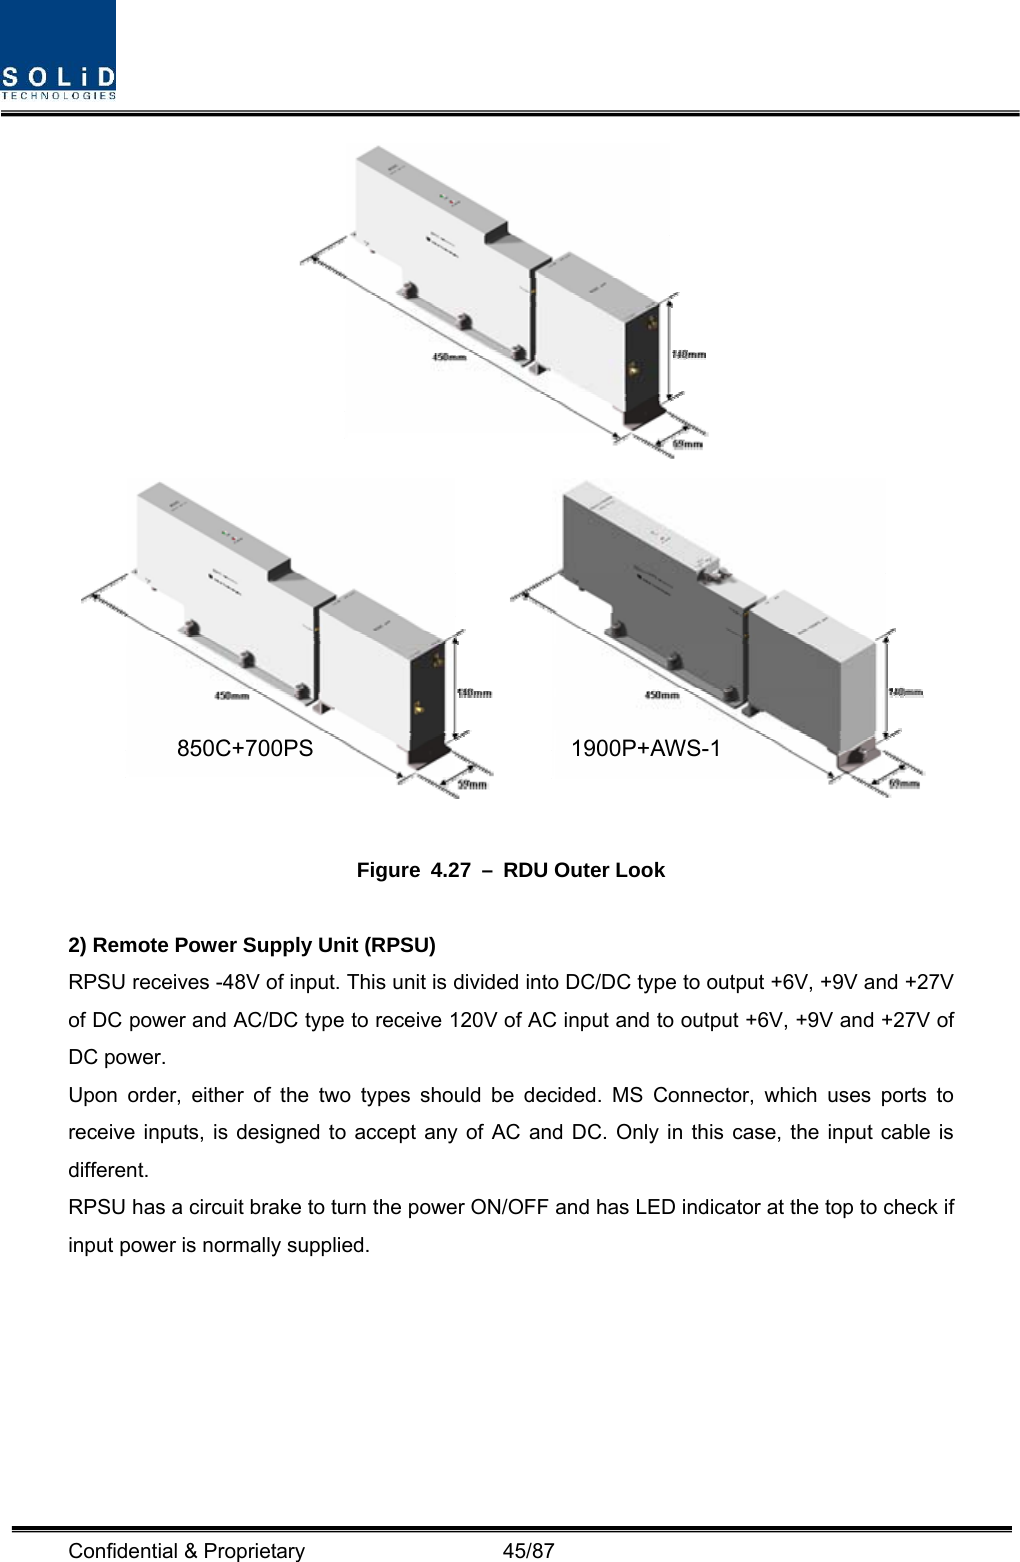  Confidential &amp; Proprietary                   45/87    Figure 4.27 – RDU Outer Look  2) Remote Power Supply Unit (RPSU) RPSU receives -48V of input. This unit is divided into DC/DC type to output +6V, +9V and +27V of DC power and AC/DC type to receive 120V of AC input and to output +6V, +9V and +27V of DC power. Upon order, either of the two types should be decided. MS Connector, which uses ports to receive inputs, is designed to accept any of AC and DC. Only in this case, the input cable is different. RPSU has a circuit brake to turn the power ON/OFF and has LED indicator at the top to check if input power is normally supplied. 850C+700PS 1900P+AWS-1